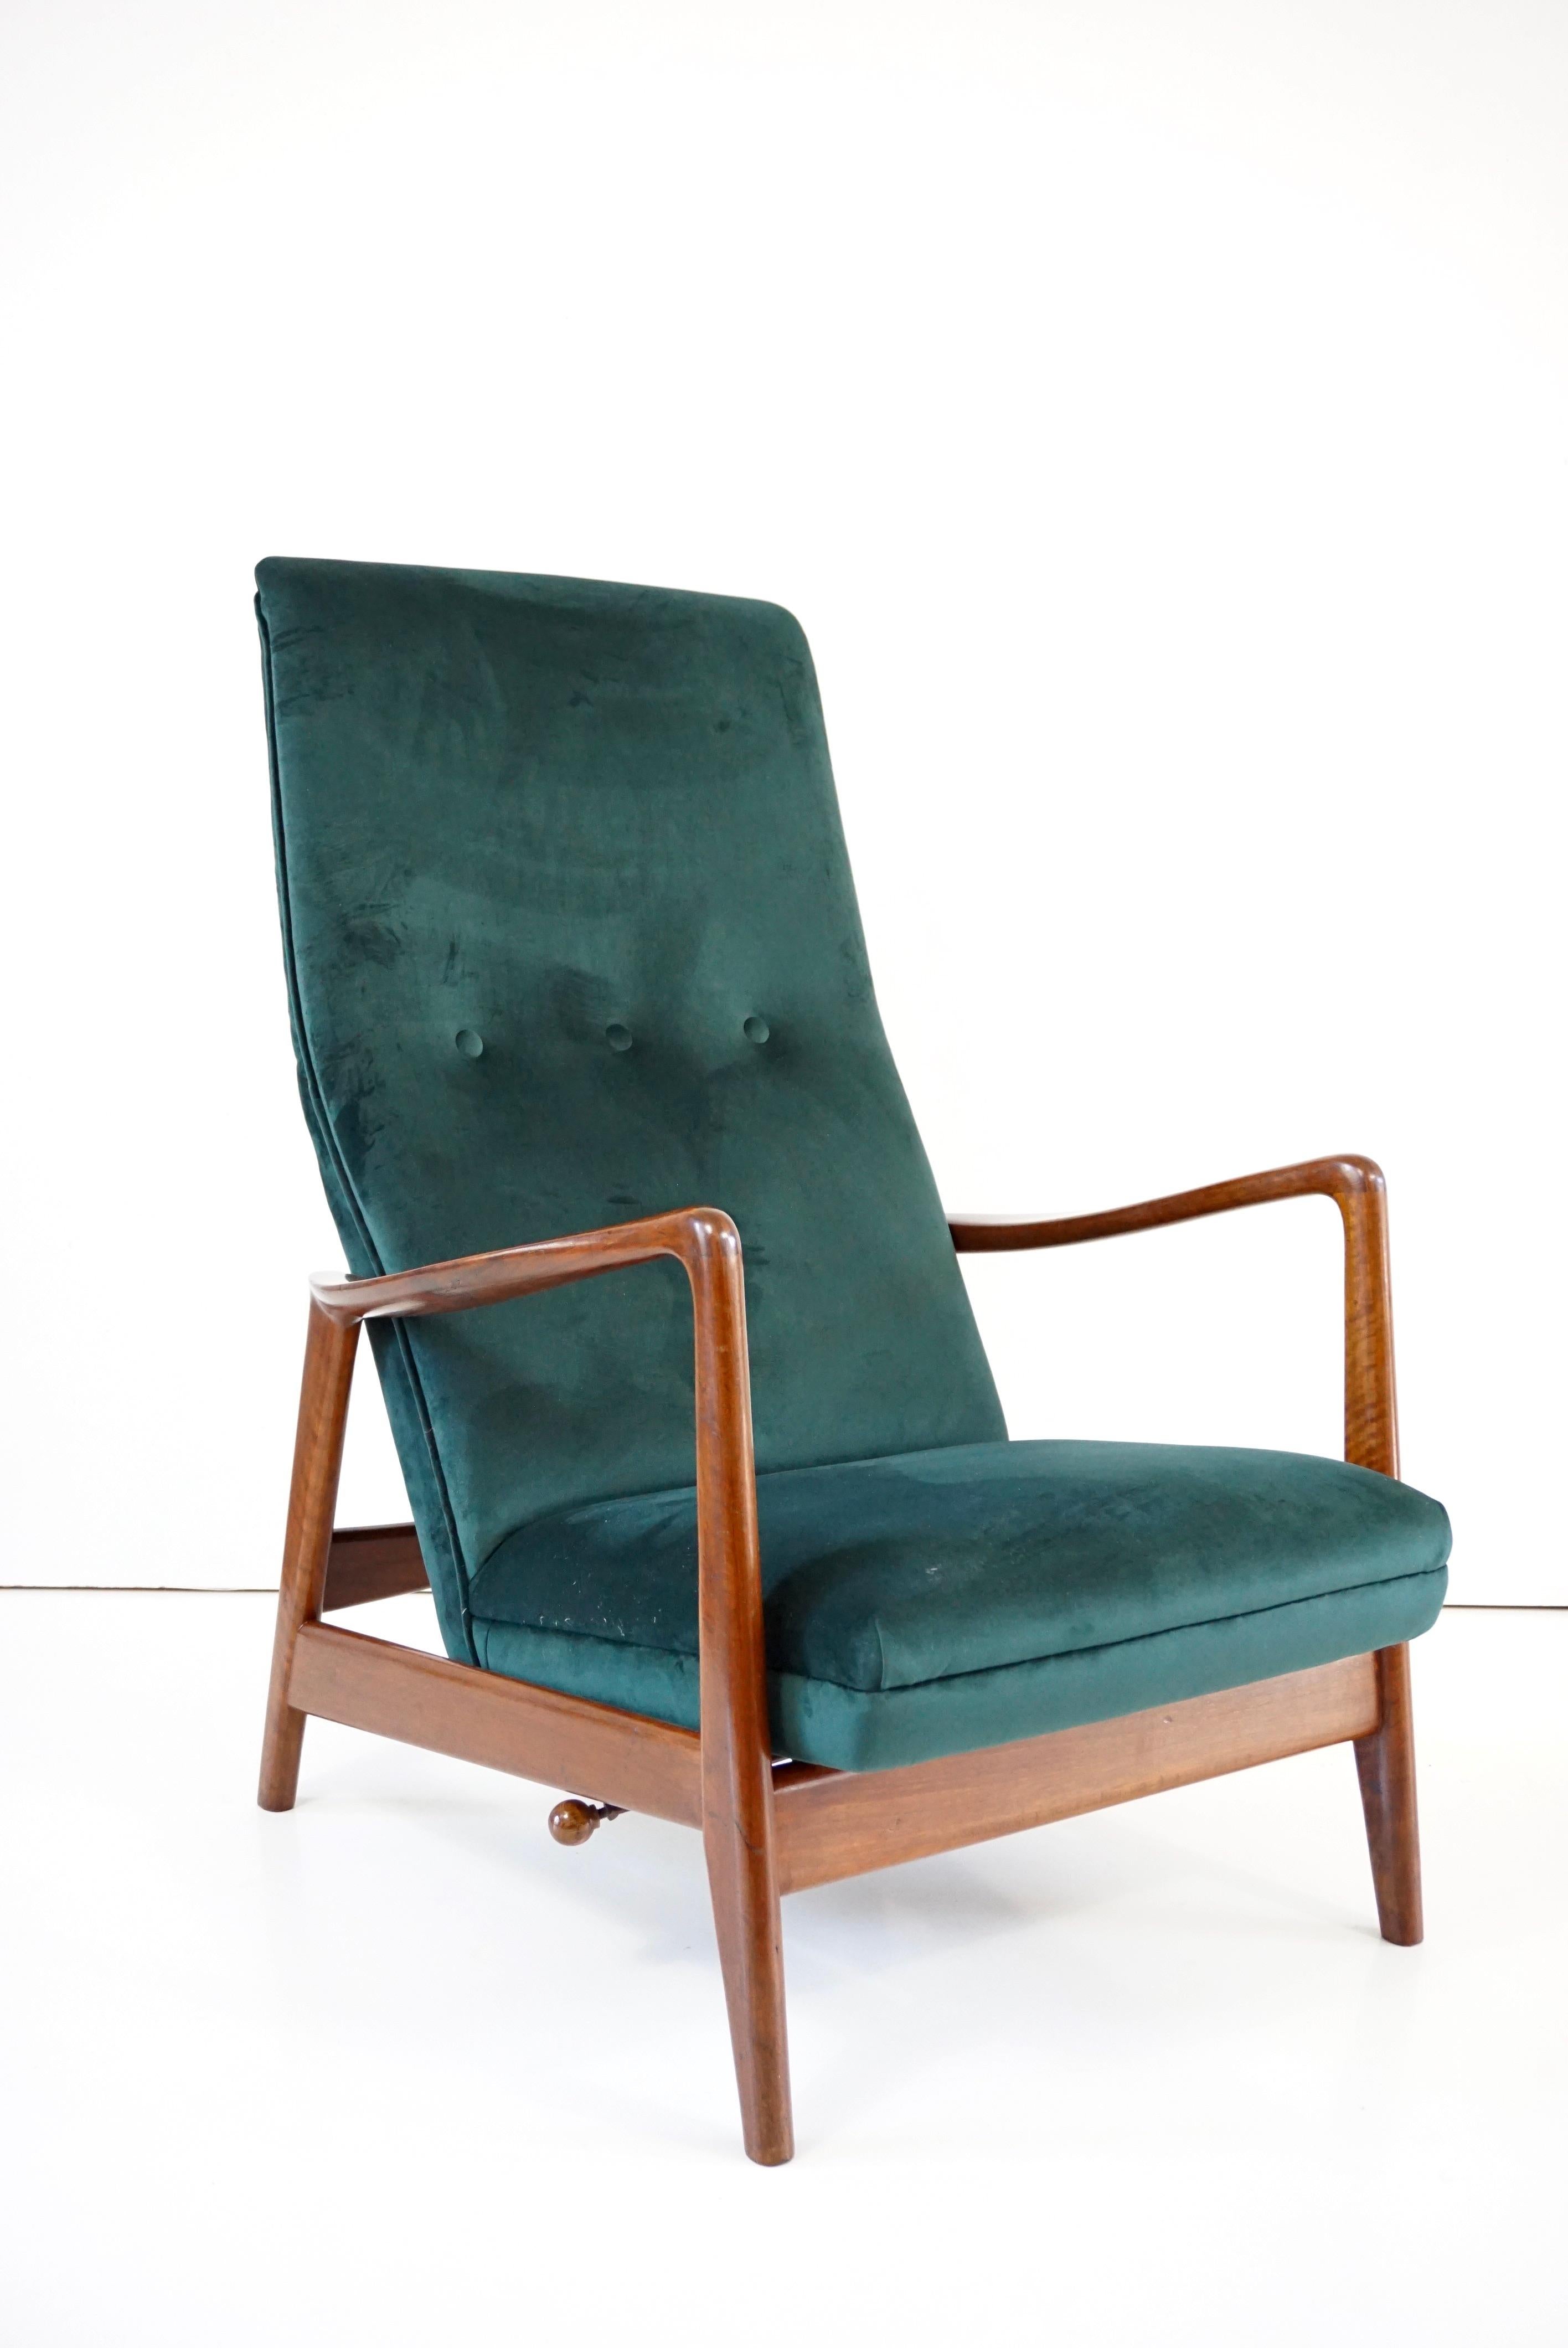 Italian Lounge Chair N.829 by Cassina Sel. by Gio Ponti for the Hotel Pdp Sorrento, 1964